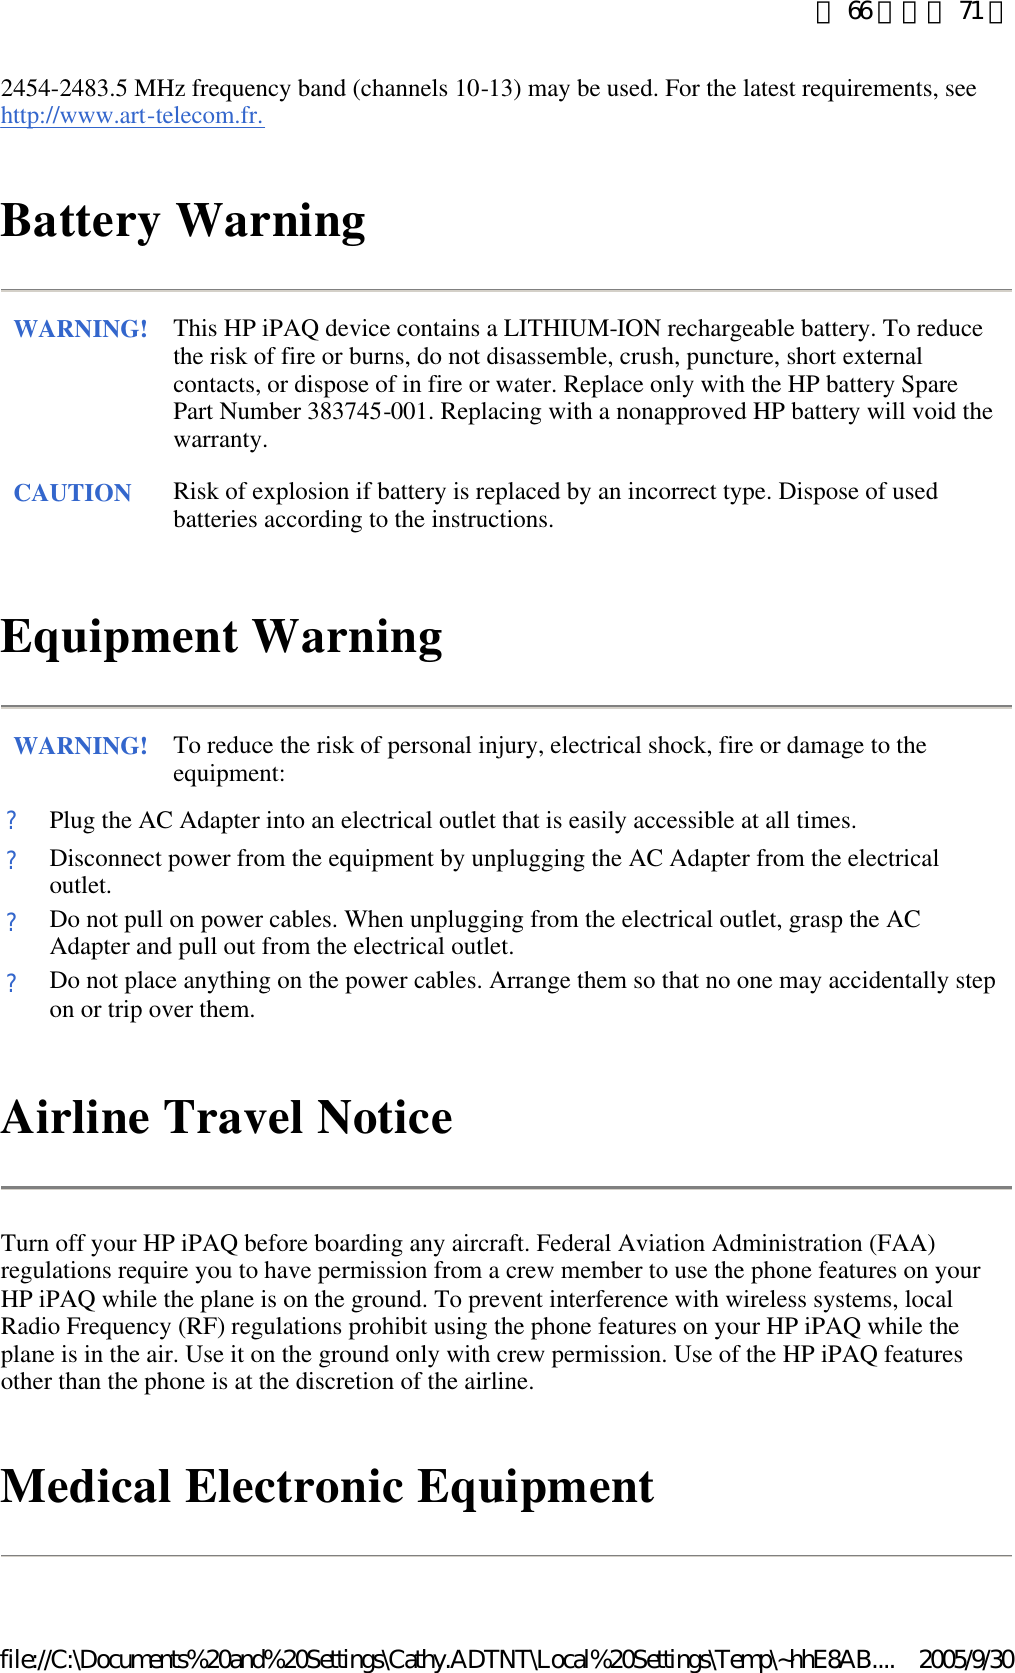 2454-2483.5 MHz frequency band (channels 10-13) may be used. For the latest requirements, see http://www.art-telecom.fr.  Battery Warning Equipment Warning Airline Travel Notice  Turn off your HP iPAQ before boarding any aircraft. Federal Aviation Administration (FAA) regulations require you to have permission from a crew member to use the phone features on your HP iPAQ while the plane is on the ground. To prevent interference with wireless systems, local Radio Frequency (RF) regulations prohibit using the phone features on your HP iPAQ while the plane is in the air. Use it on the ground only with crew permission. Use of the HP iPAQ features other than the phone is at the discretion of the airline.  Medical Electronic Equipment  WARNING! This HP iPAQ device contains a LITHIUM-ION rechargeable battery. To reduce the risk of fire or burns, do not disassemble, crush, puncture, short external contacts, or dispose of in fire or water. Replace only with the HP battery Spare Part Number 383745-001. Replacing with a nonapproved HP battery will void the warranty.  CAUTION Risk of explosion if battery is replaced by an incorrect type. Dispose of used batteries according to the instructions.  WARNING! To reduce the risk of personal injury, electrical shock, fire or damage to the equipment:  ?Plug the AC Adapter into an electrical outlet that is easily accessible at all times. ?Disconnect power from the equipment by unplugging the AC Adapter from the electrical outlet. ?Do not pull on power cables. When unplugging from the electrical outlet, grasp the AC Adapter and pull out from the electrical outlet. ?Do not place anything on the power cables. Arrange them so that no one may accidentally step on or trip over them. 第 66 頁，共 71 頁2005/9/30file://C:\Documents%20and%20Settings\Cathy.ADTNT\Local%20Settings\Temp\~hhE8AB....